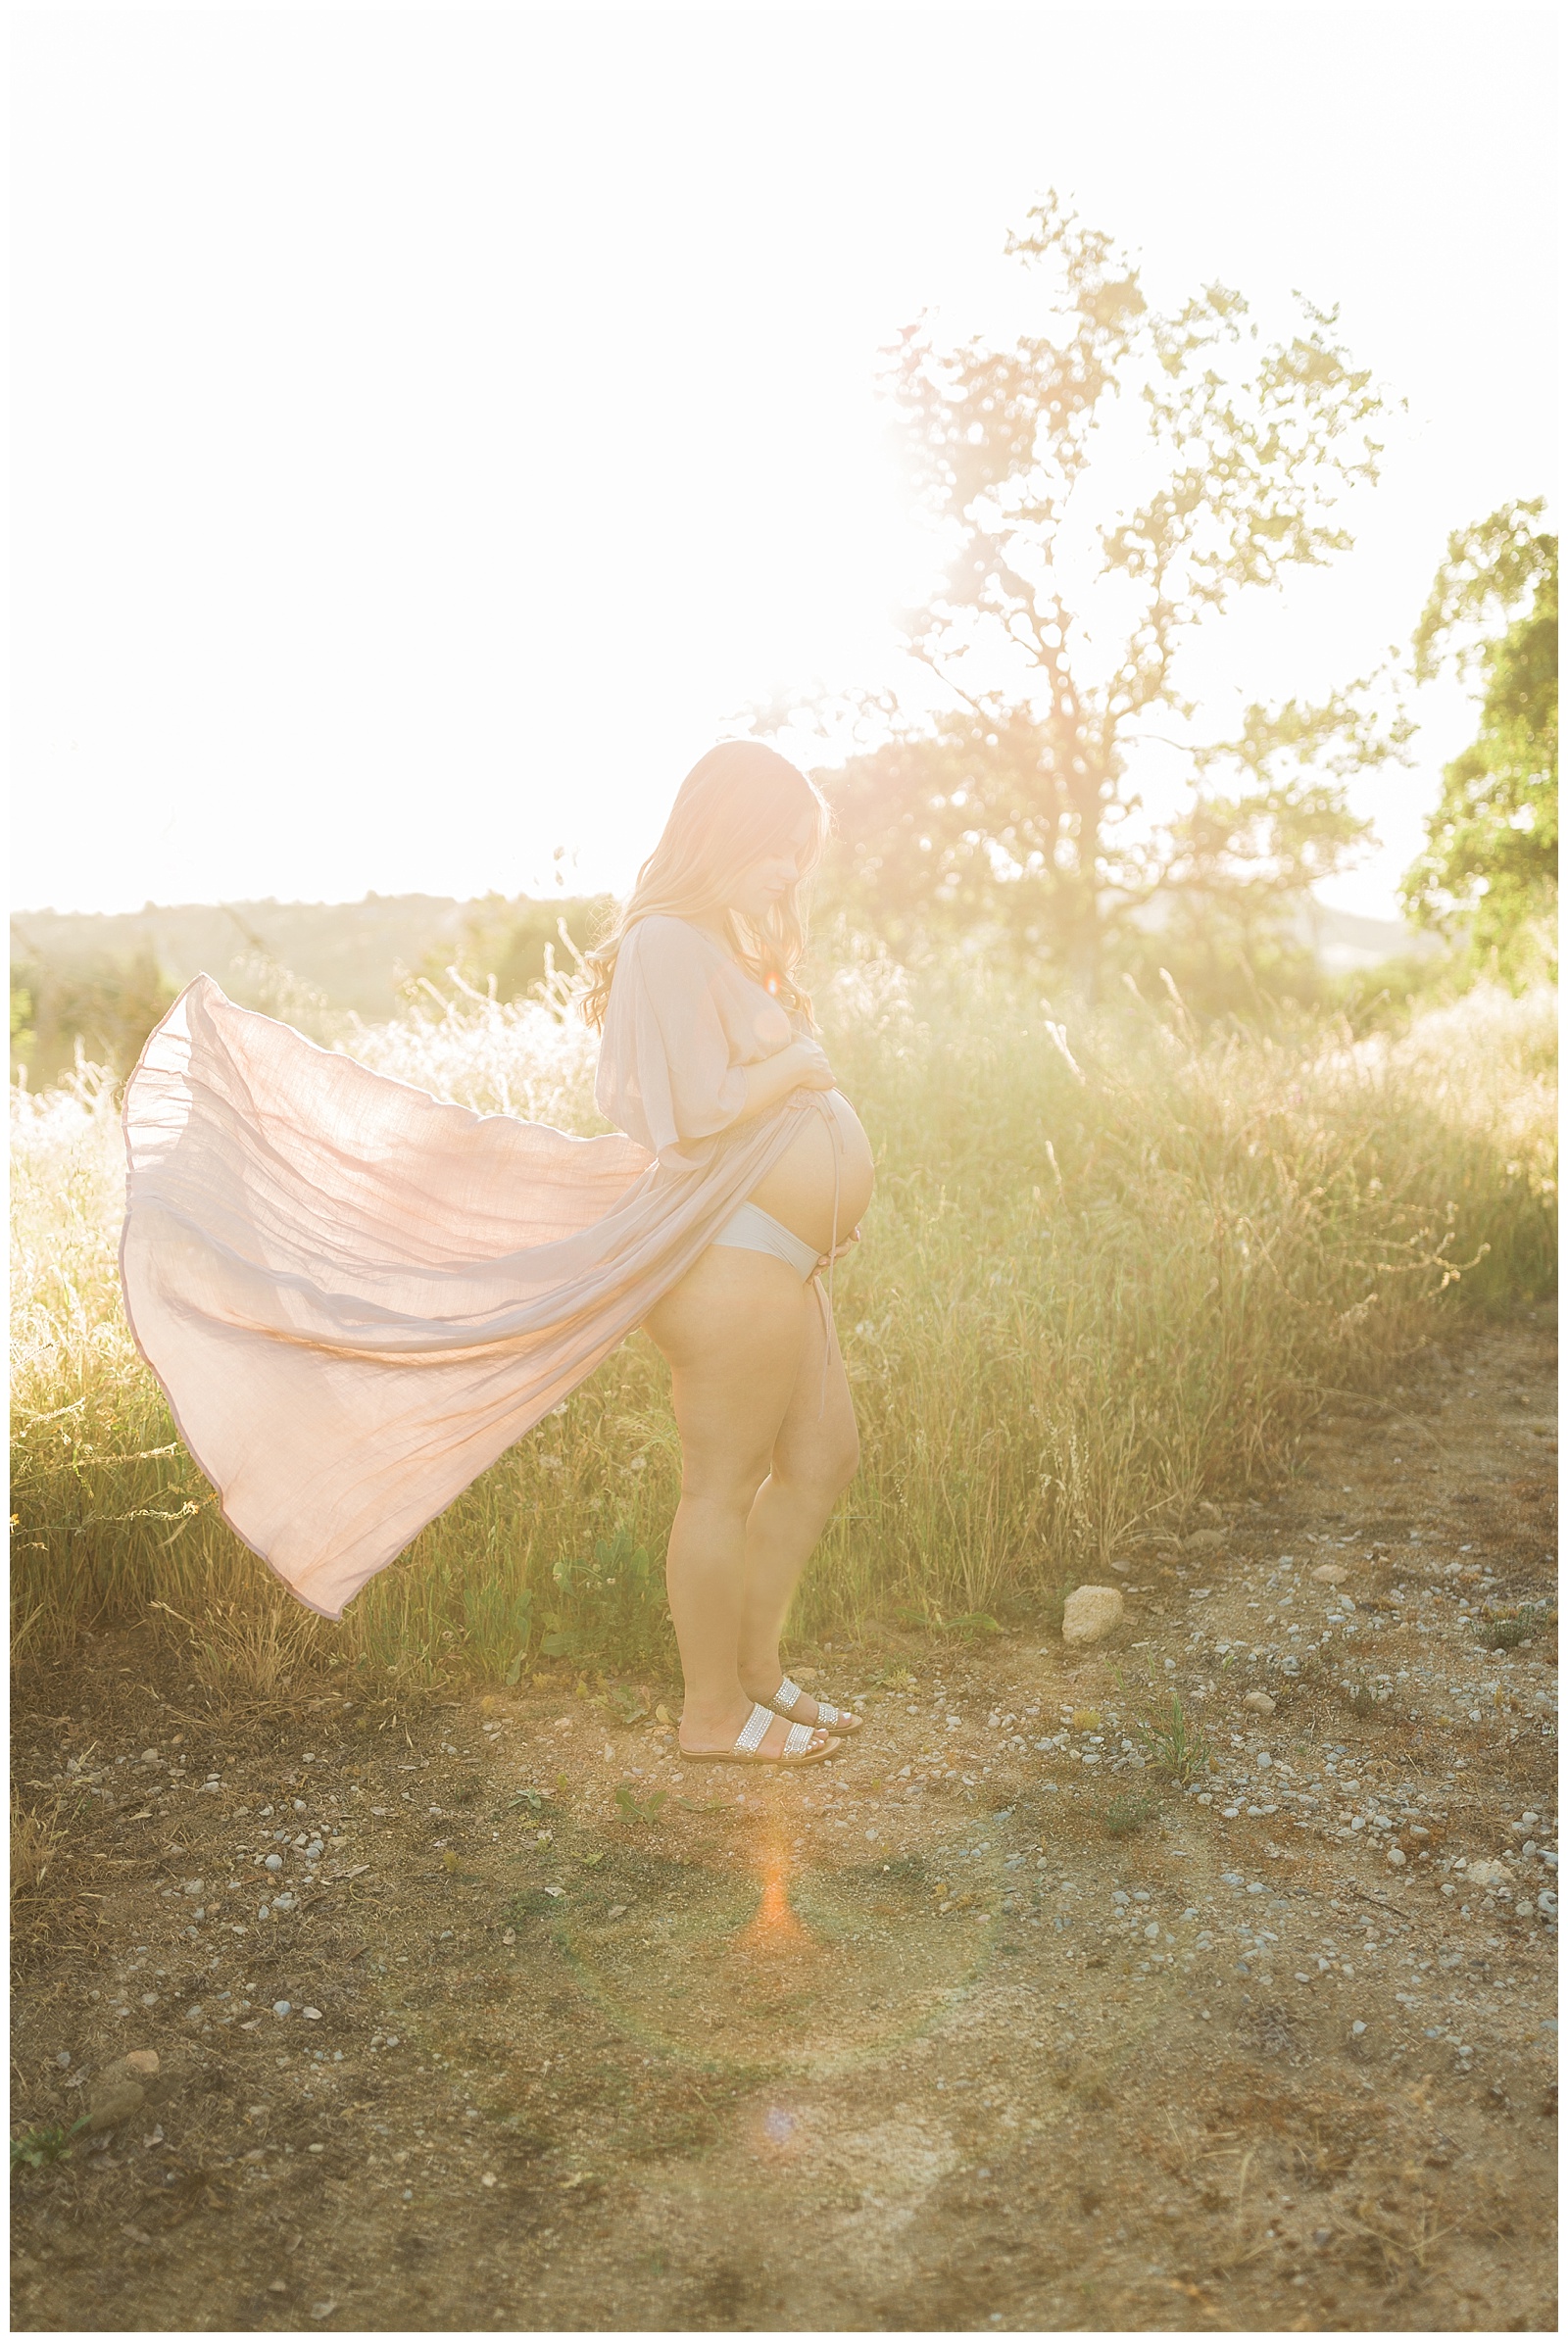  pregnant mom in a grassy field and sunset